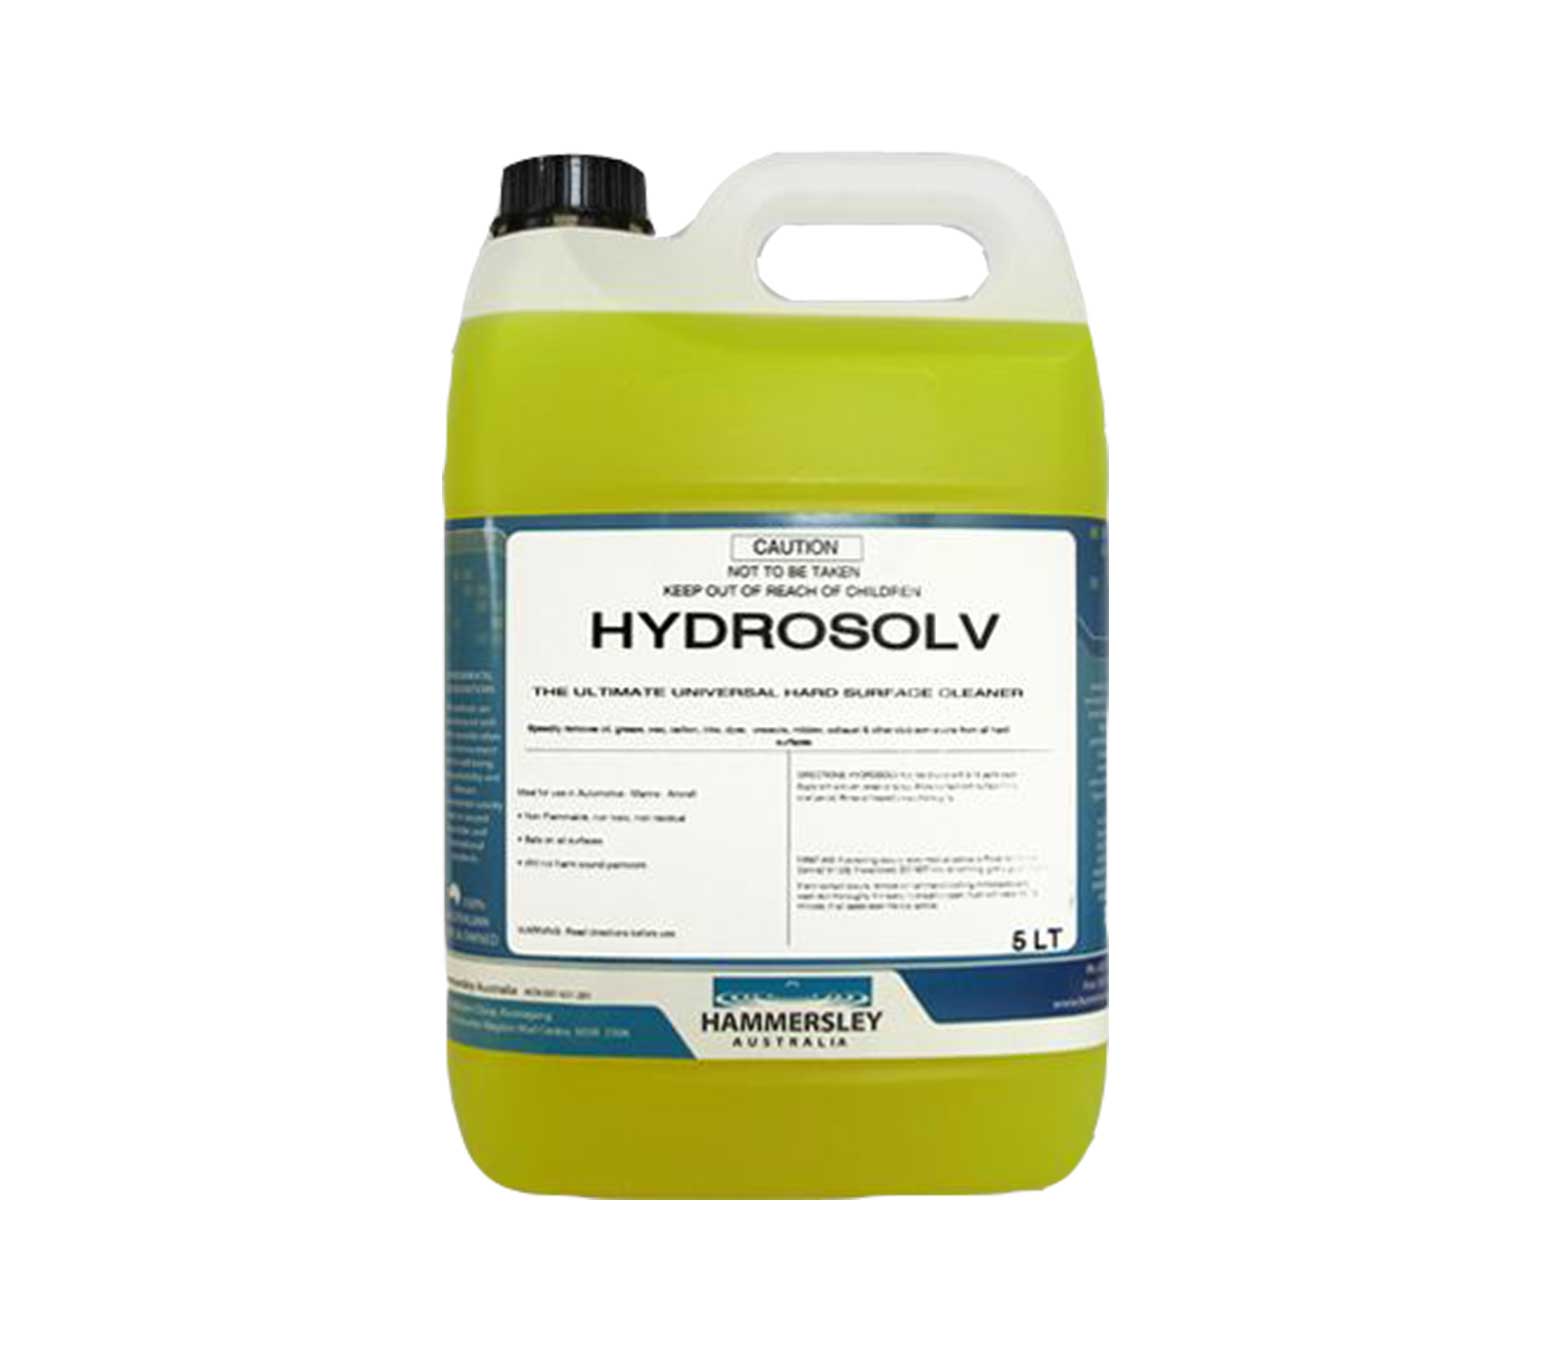 Hydrosolv - The Ultimate Universal Hard Surface Cleaner.